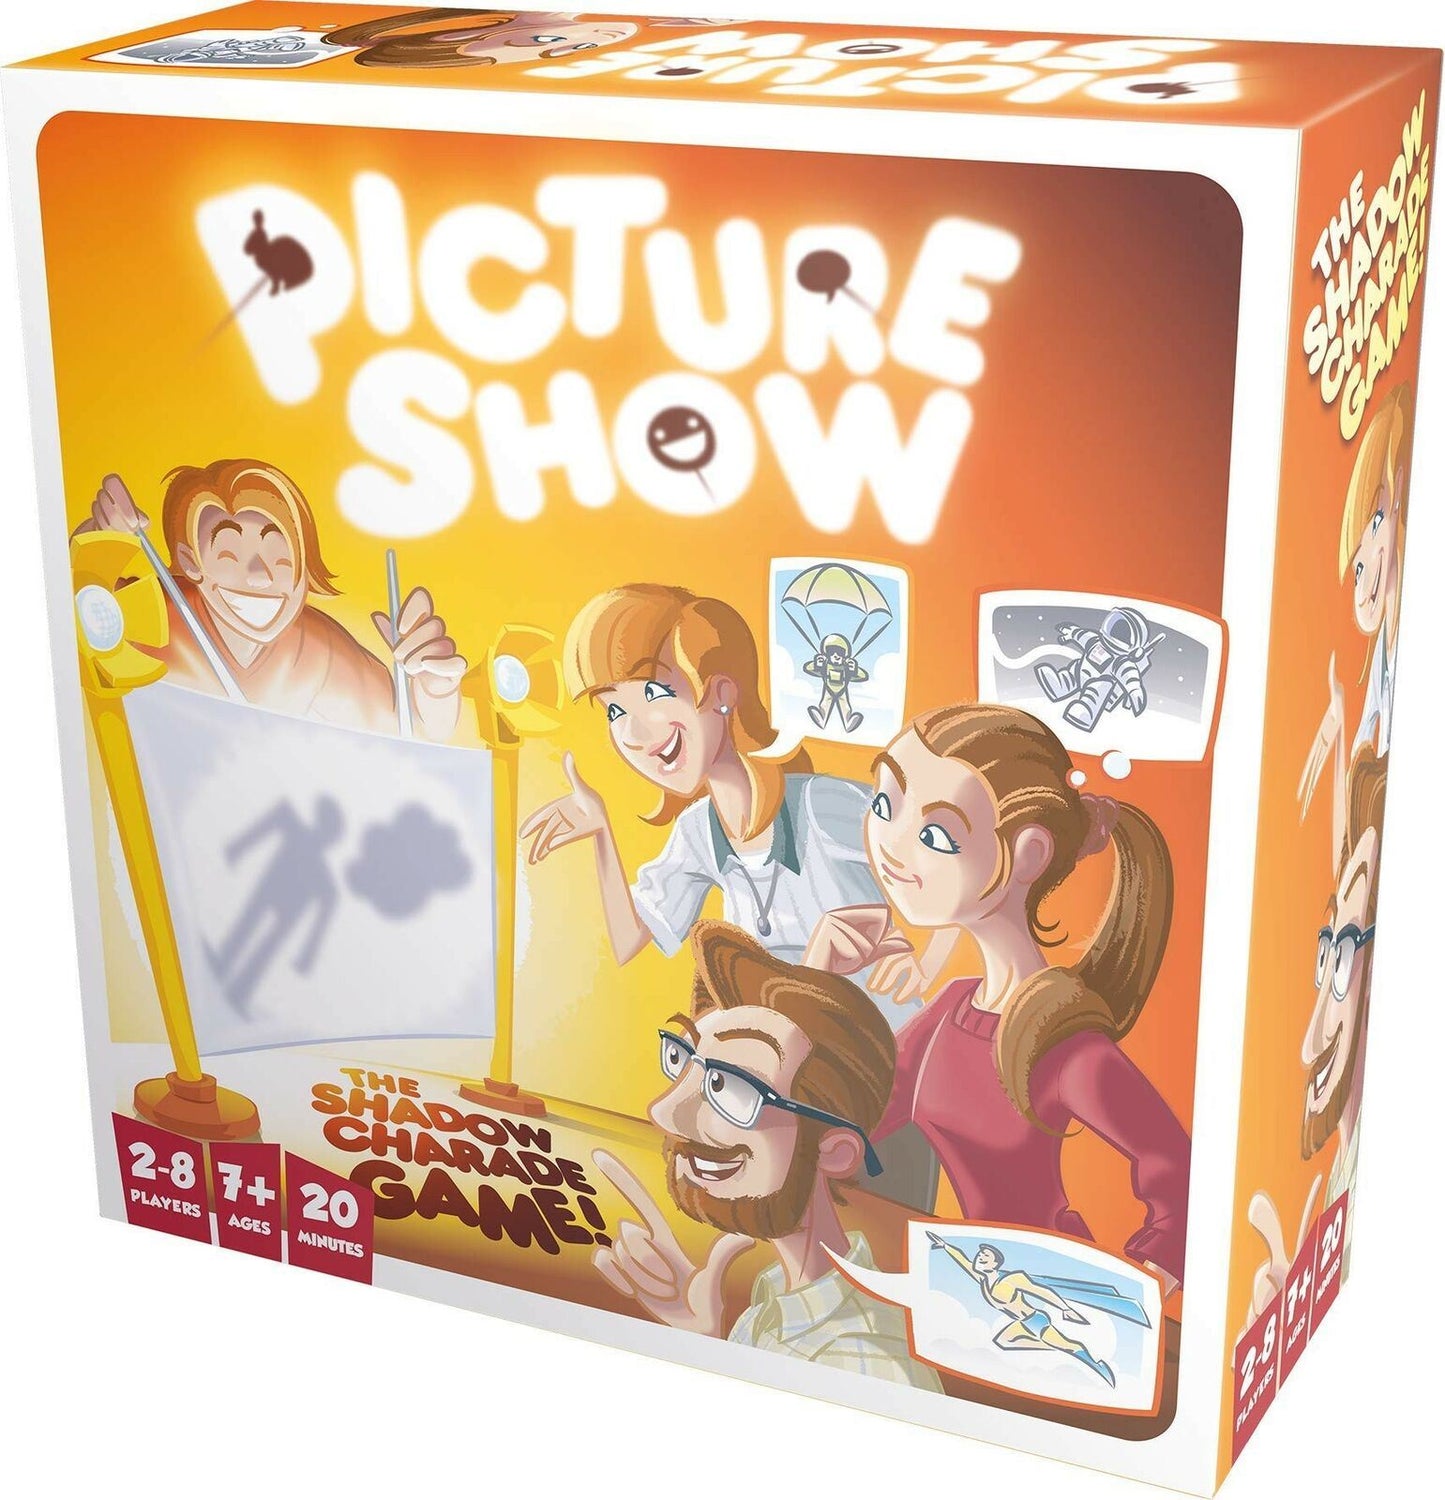 Asmodee PICTURE SHOW - The Shadow Charade Game [ASMPS01] - Family Fun!